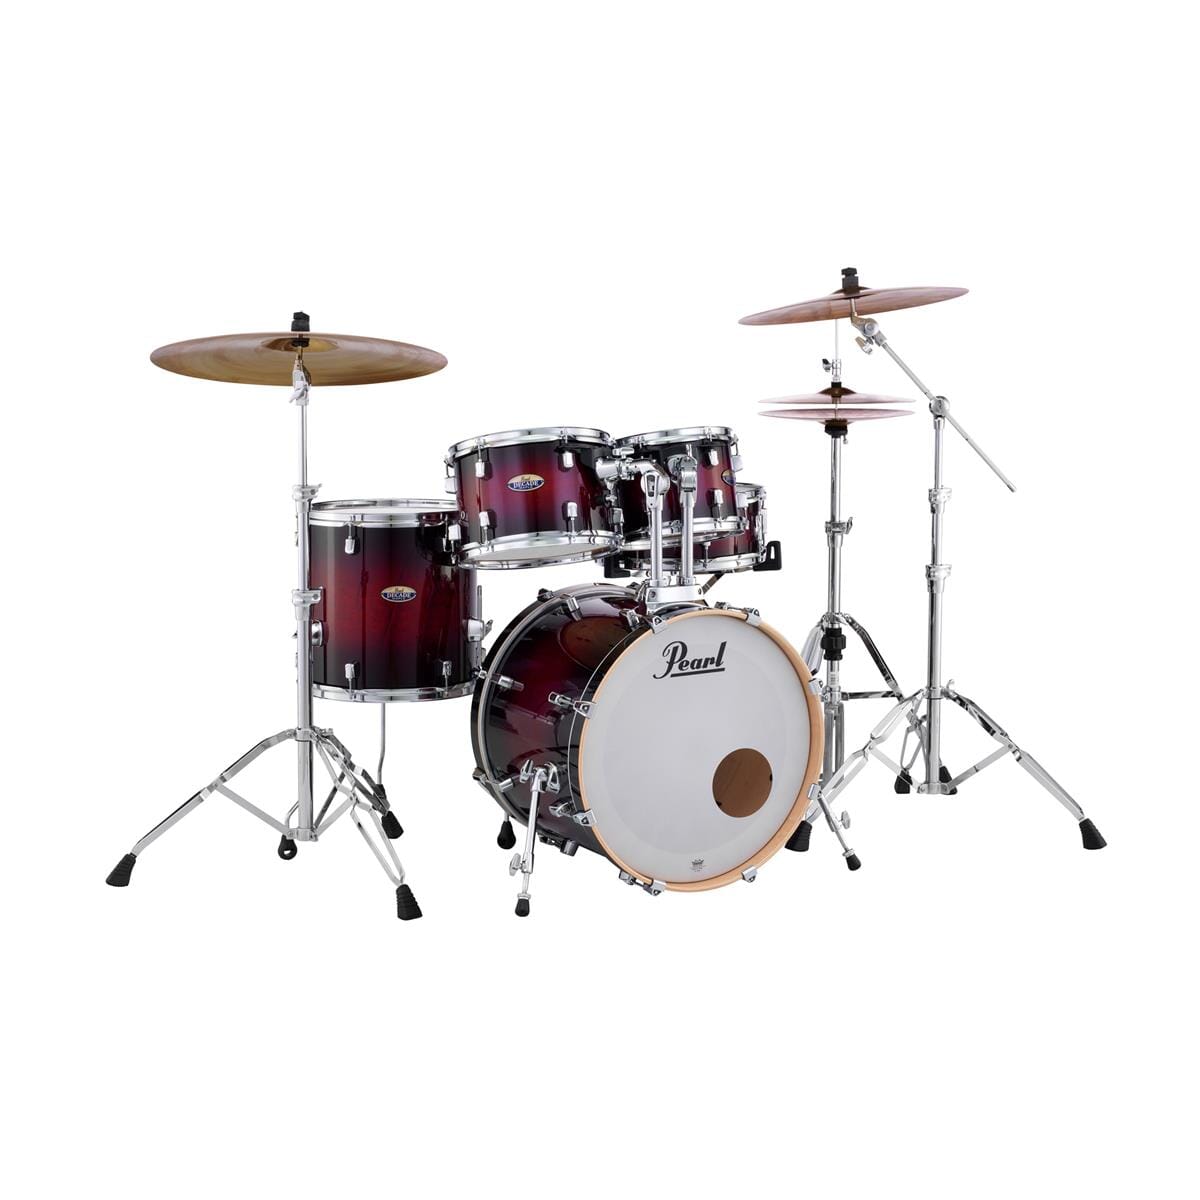 Pearl Decade Maple 5pc Shell Pack, Gloss Deep Red Burst Finish (DMP905PC261) drum kit pearl 